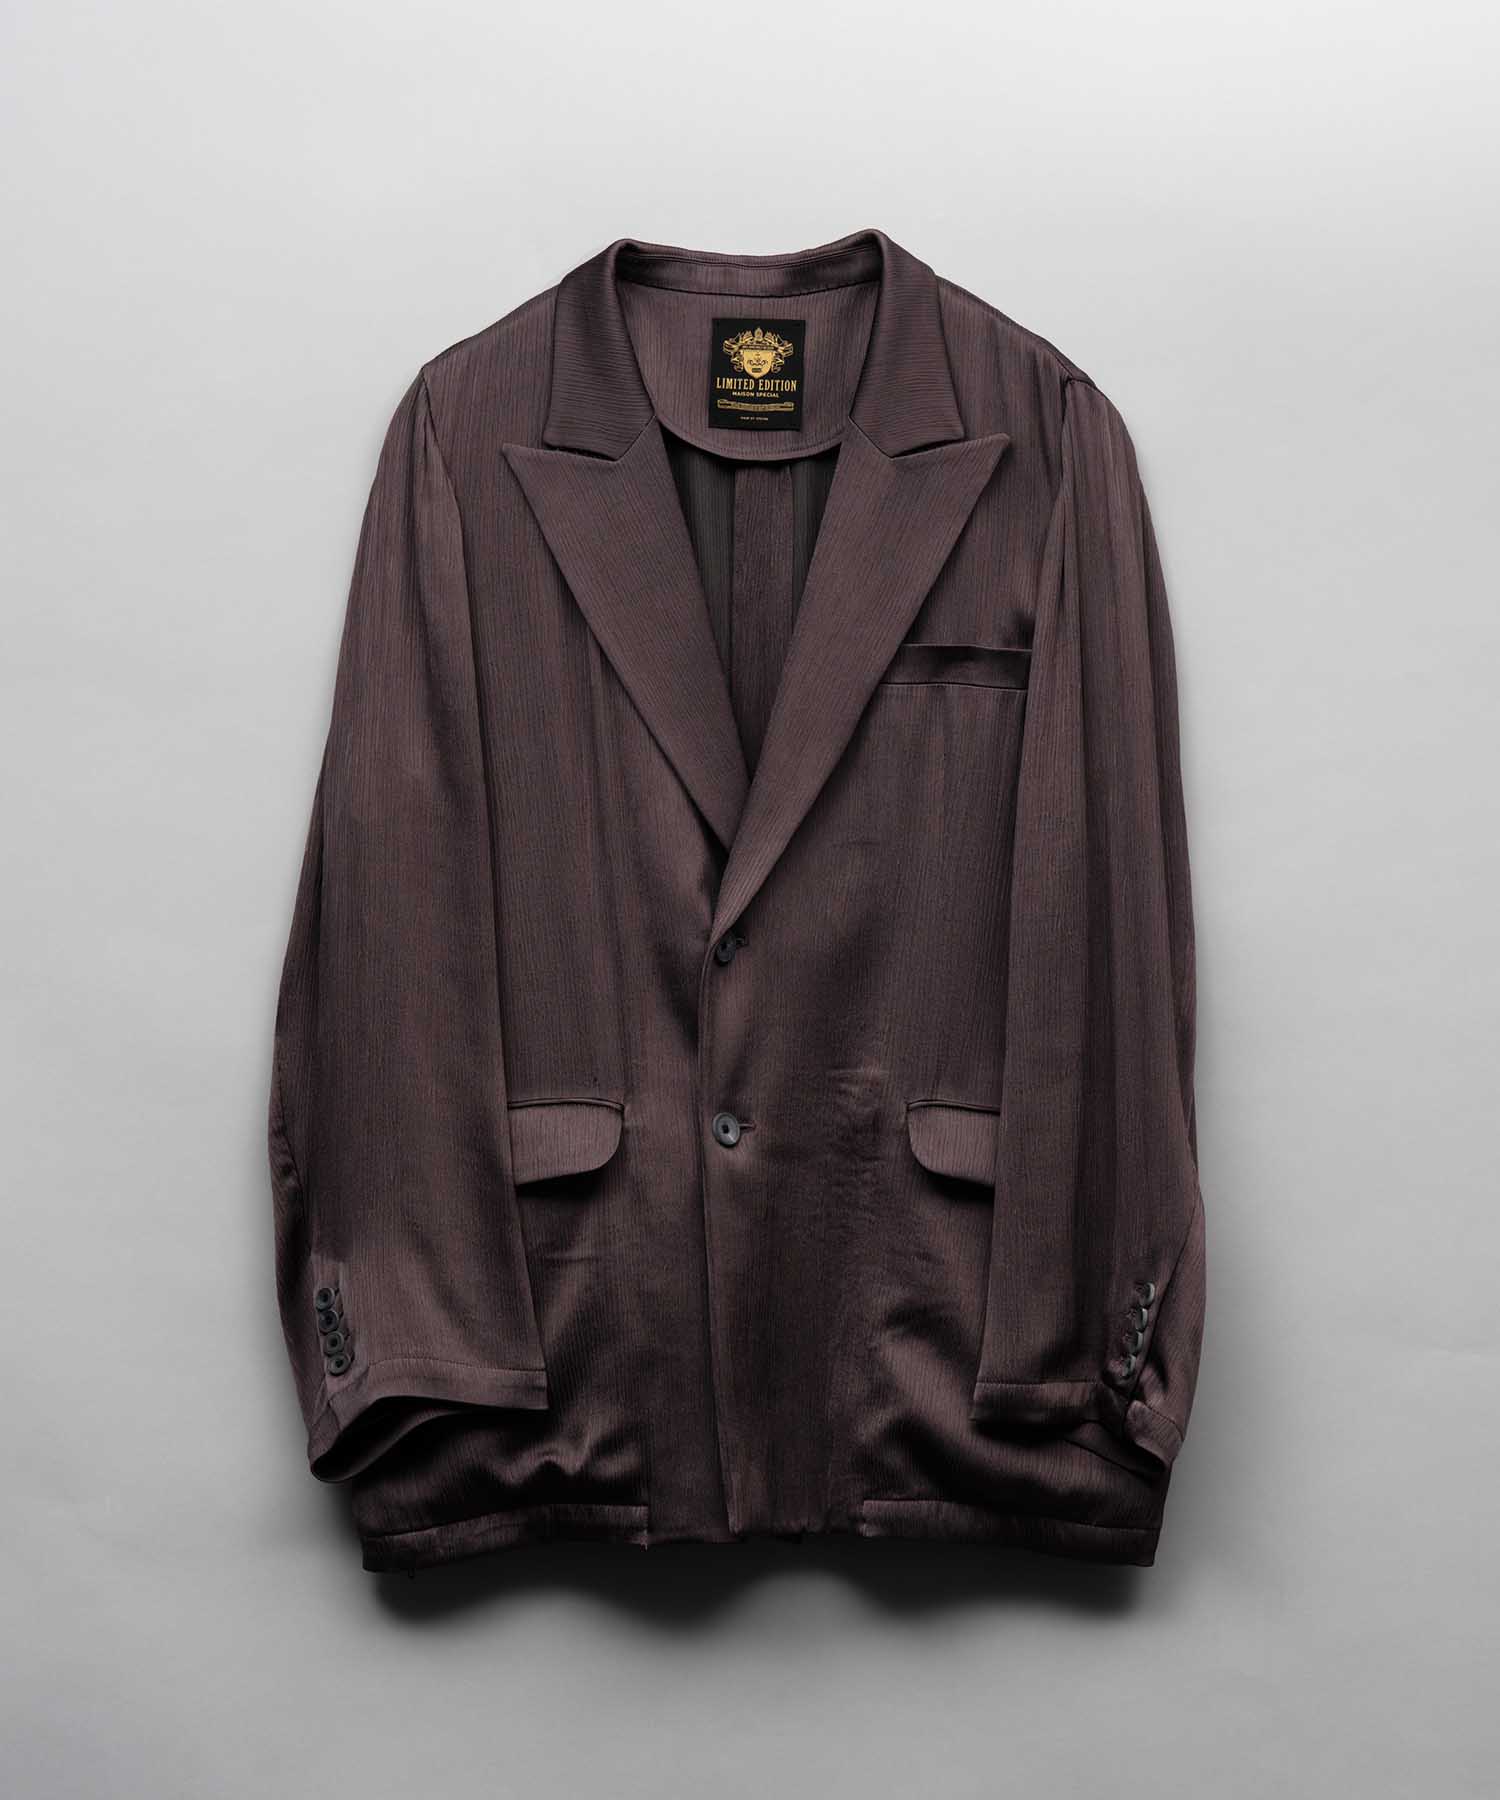 [Limited Edition] Dress-Over Peaked Lapel Semi-DOUBLE TAILORED JACKET